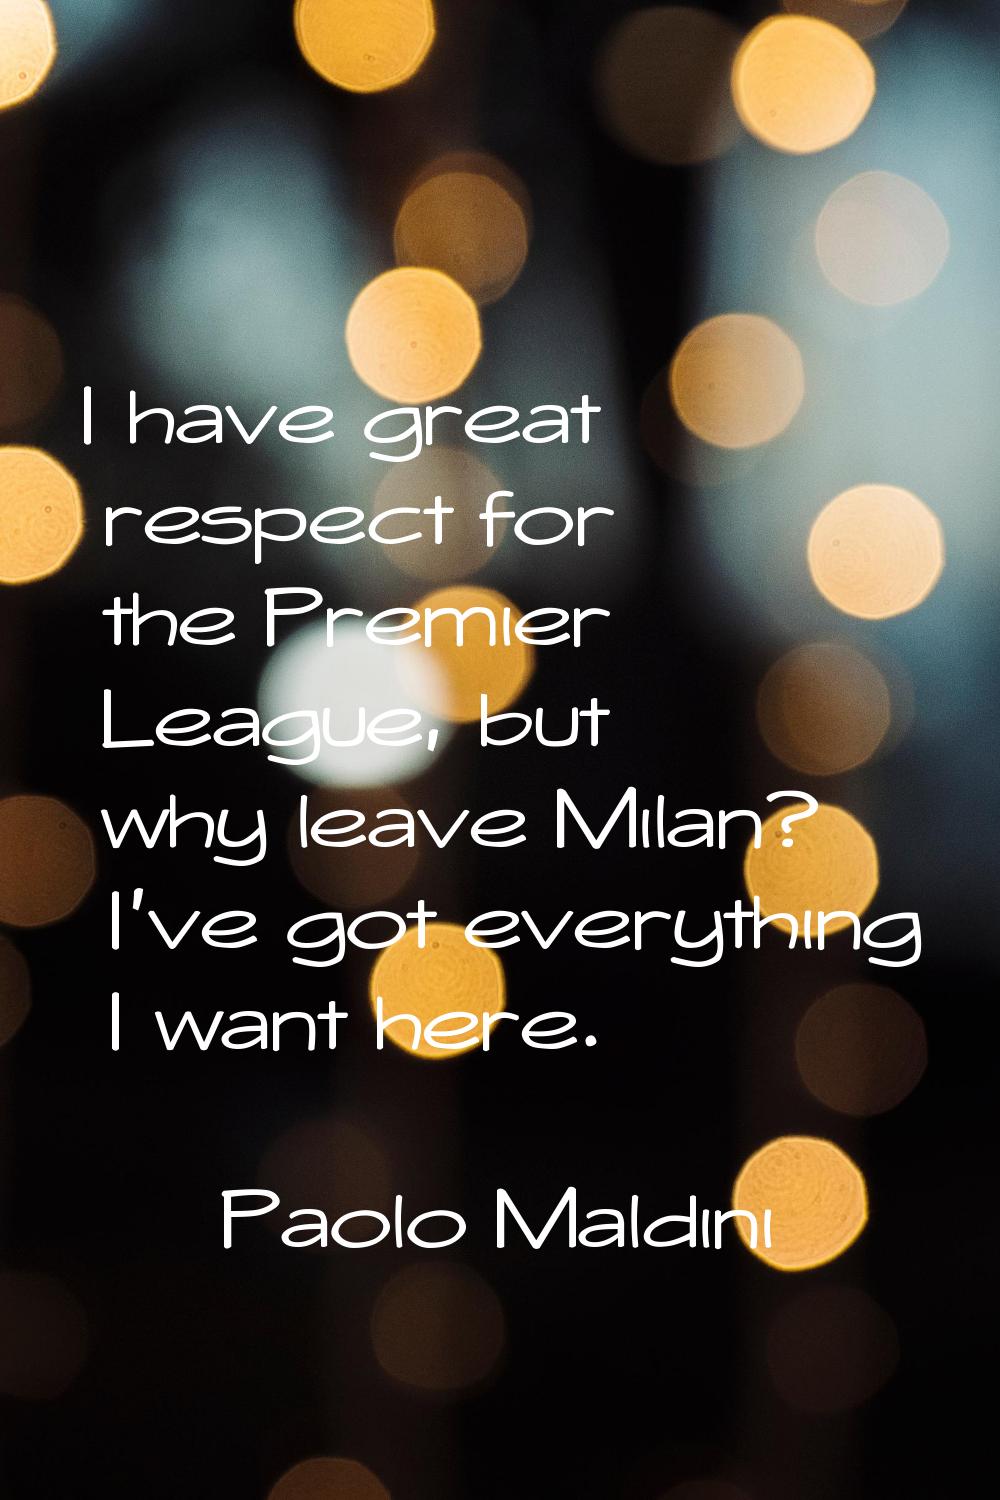 I have great respect for the Premier League, but why leave Milan? I've got everything I want here.